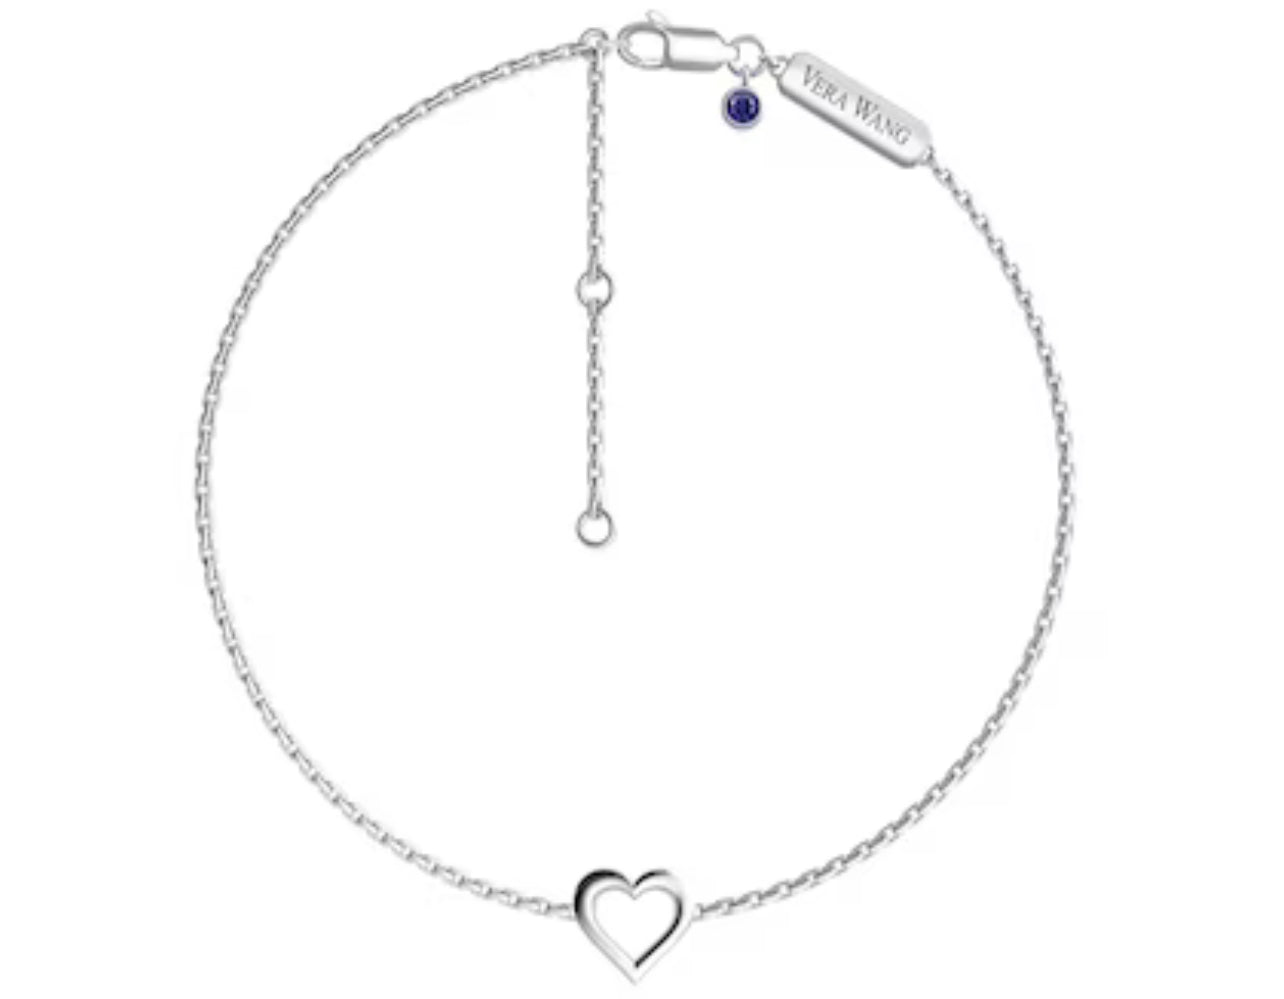 Child's Vera Wang Love Collection Heart Bracelet in Sterling Silver - 6.0"